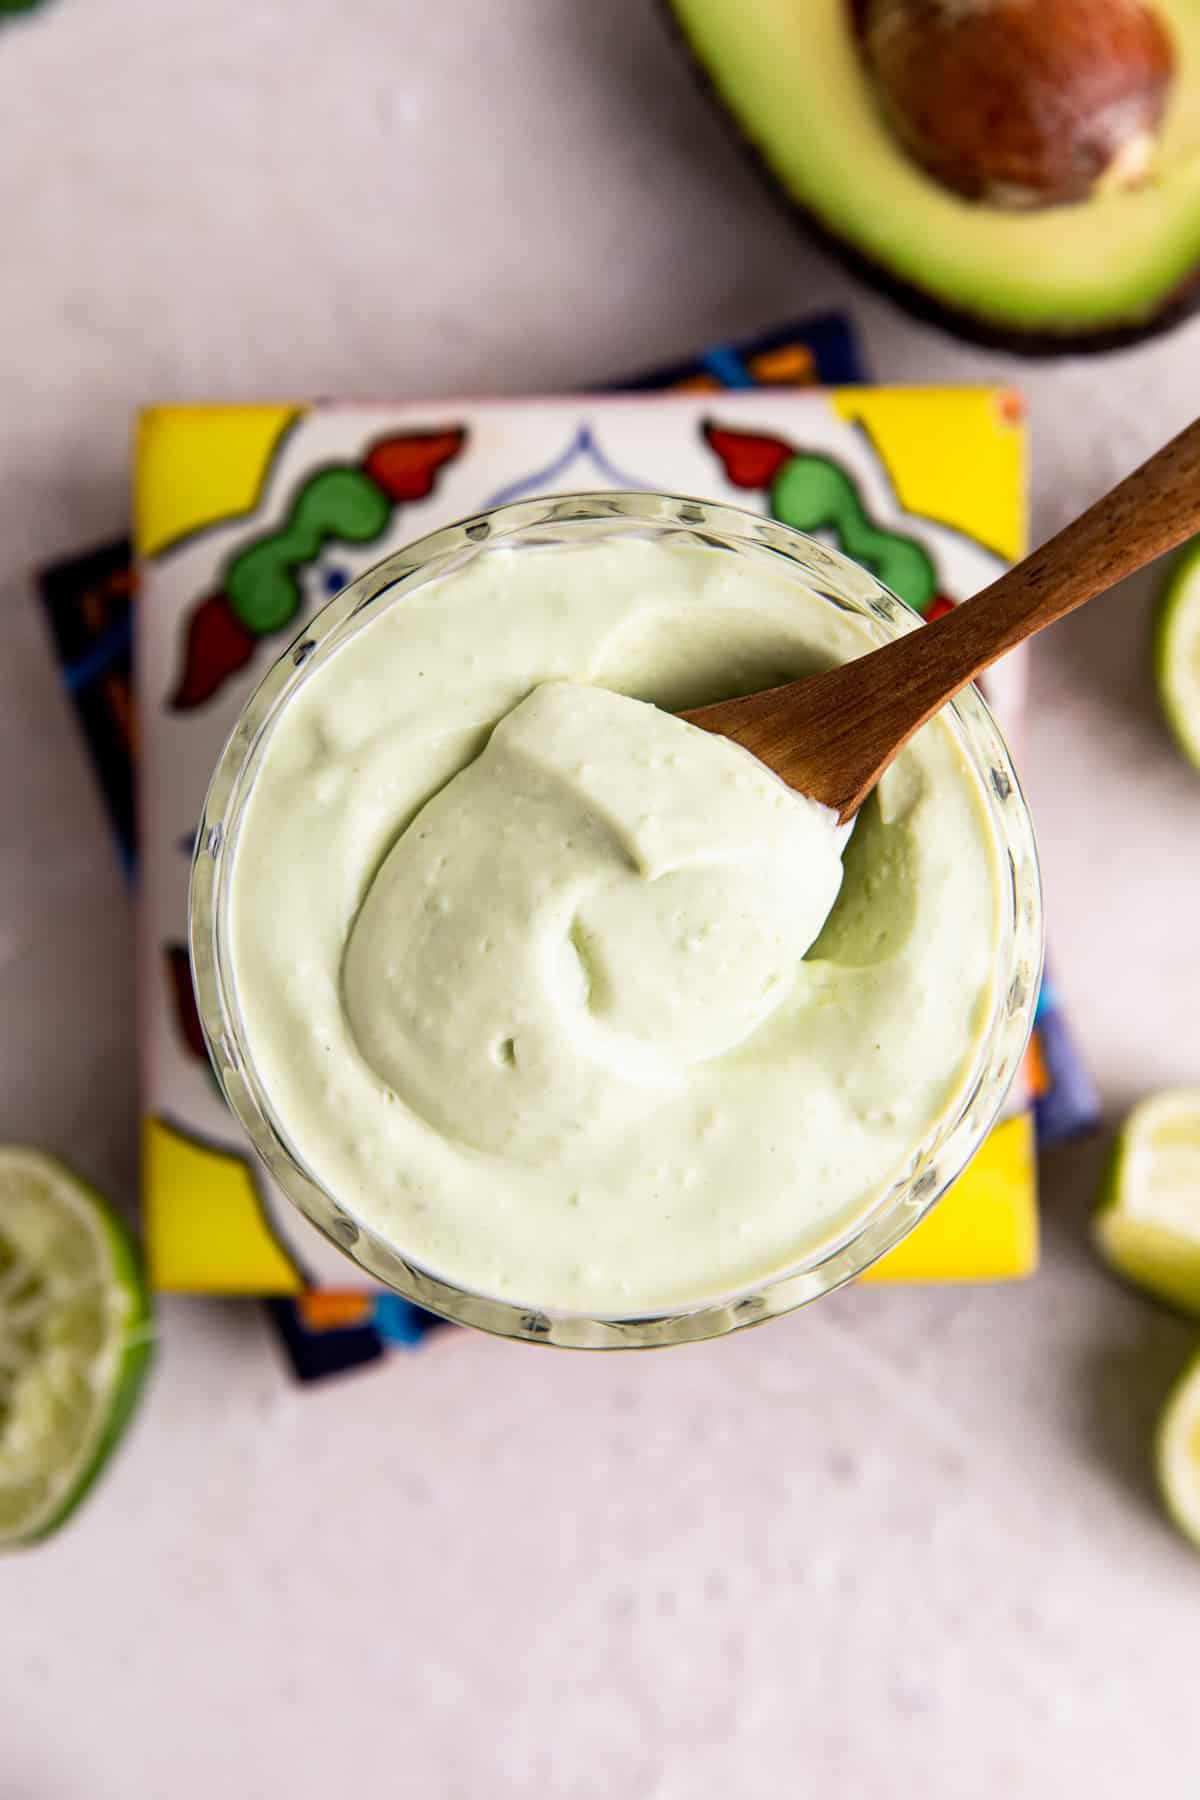 Overhead view of a cup filled with light green colored avocado crema being scooped up with a wooden spoon.